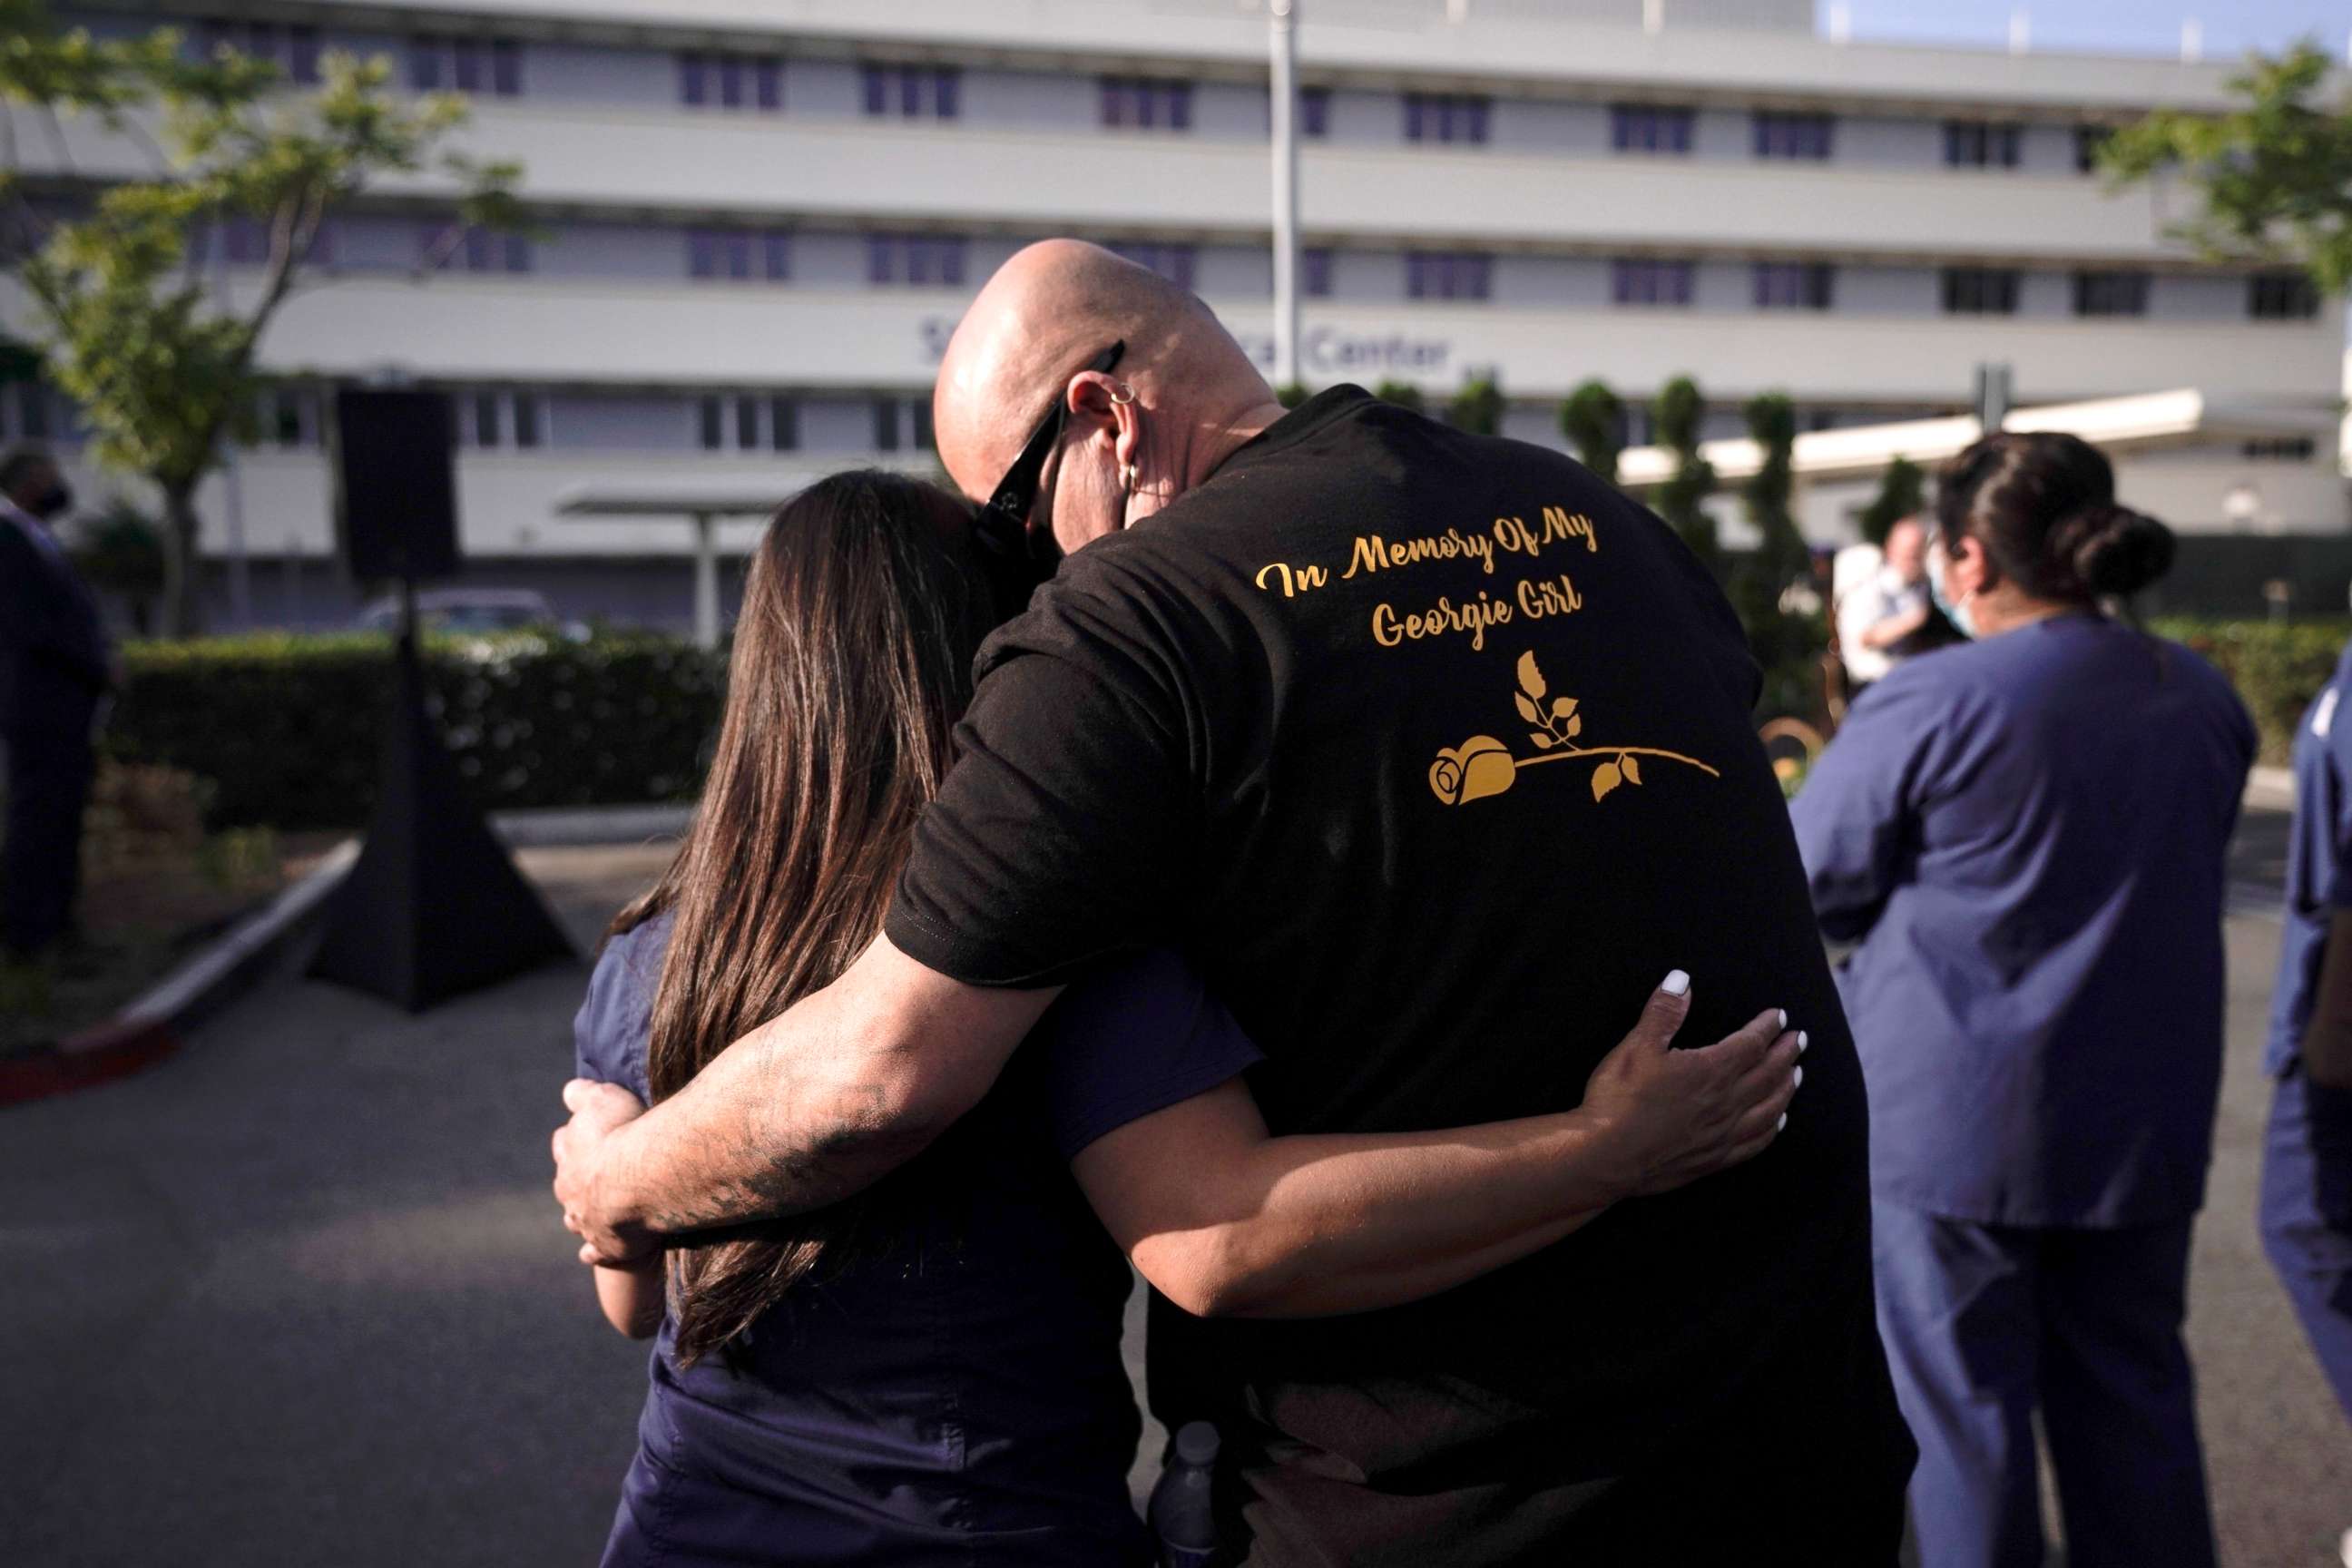 PHOTO: Rick Moran, right, who lost his wife to COVID-19 last year, is comforted at an event held to honor health care workers and those who lost loved ones to the virus at Providence St. Jude Medical Center in Fullerton, Calif., May 10, 2021.